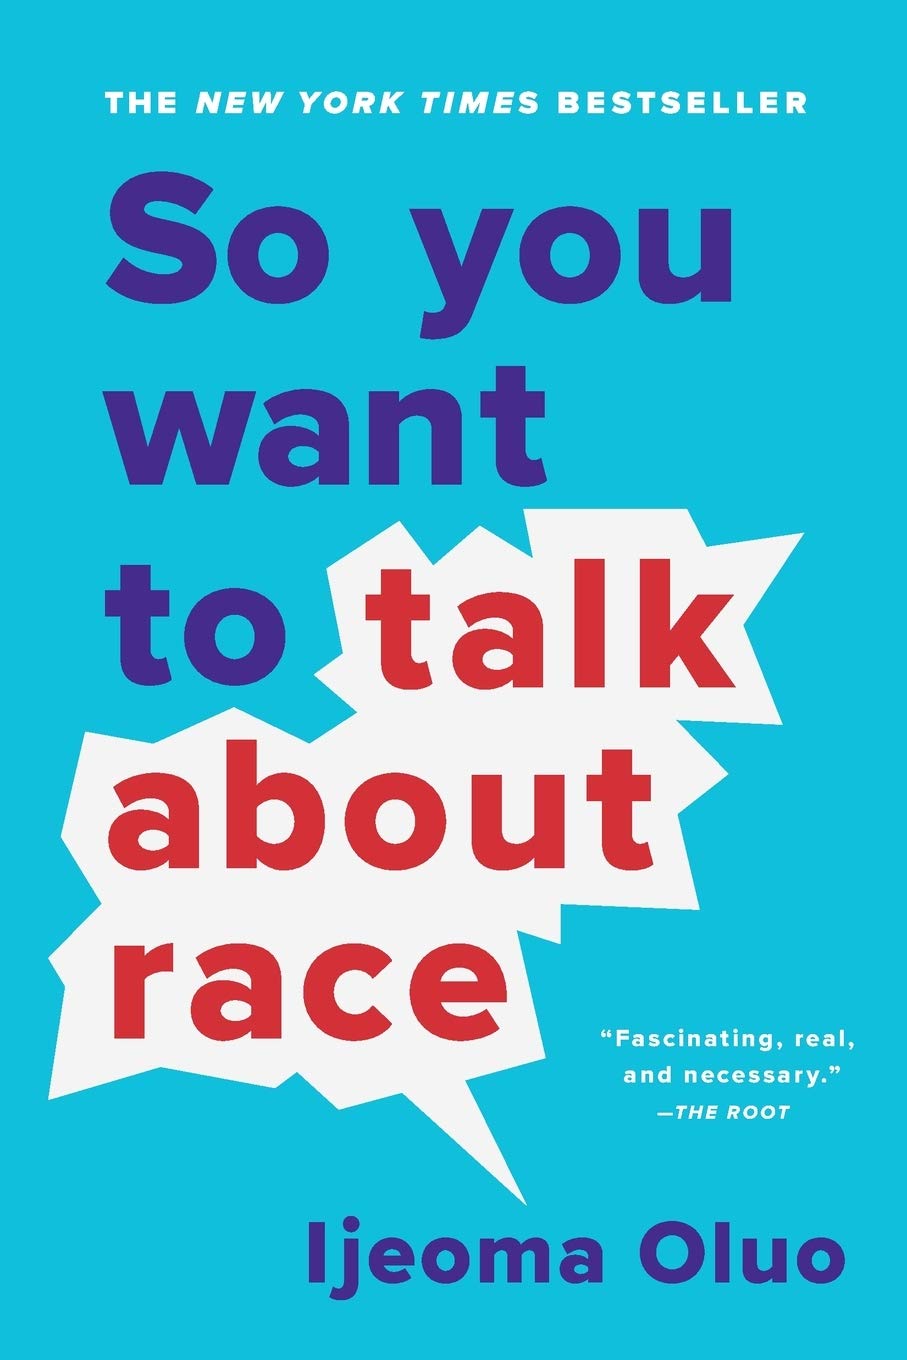 So You Want To Talk About Race [Ijeoma Oluo]